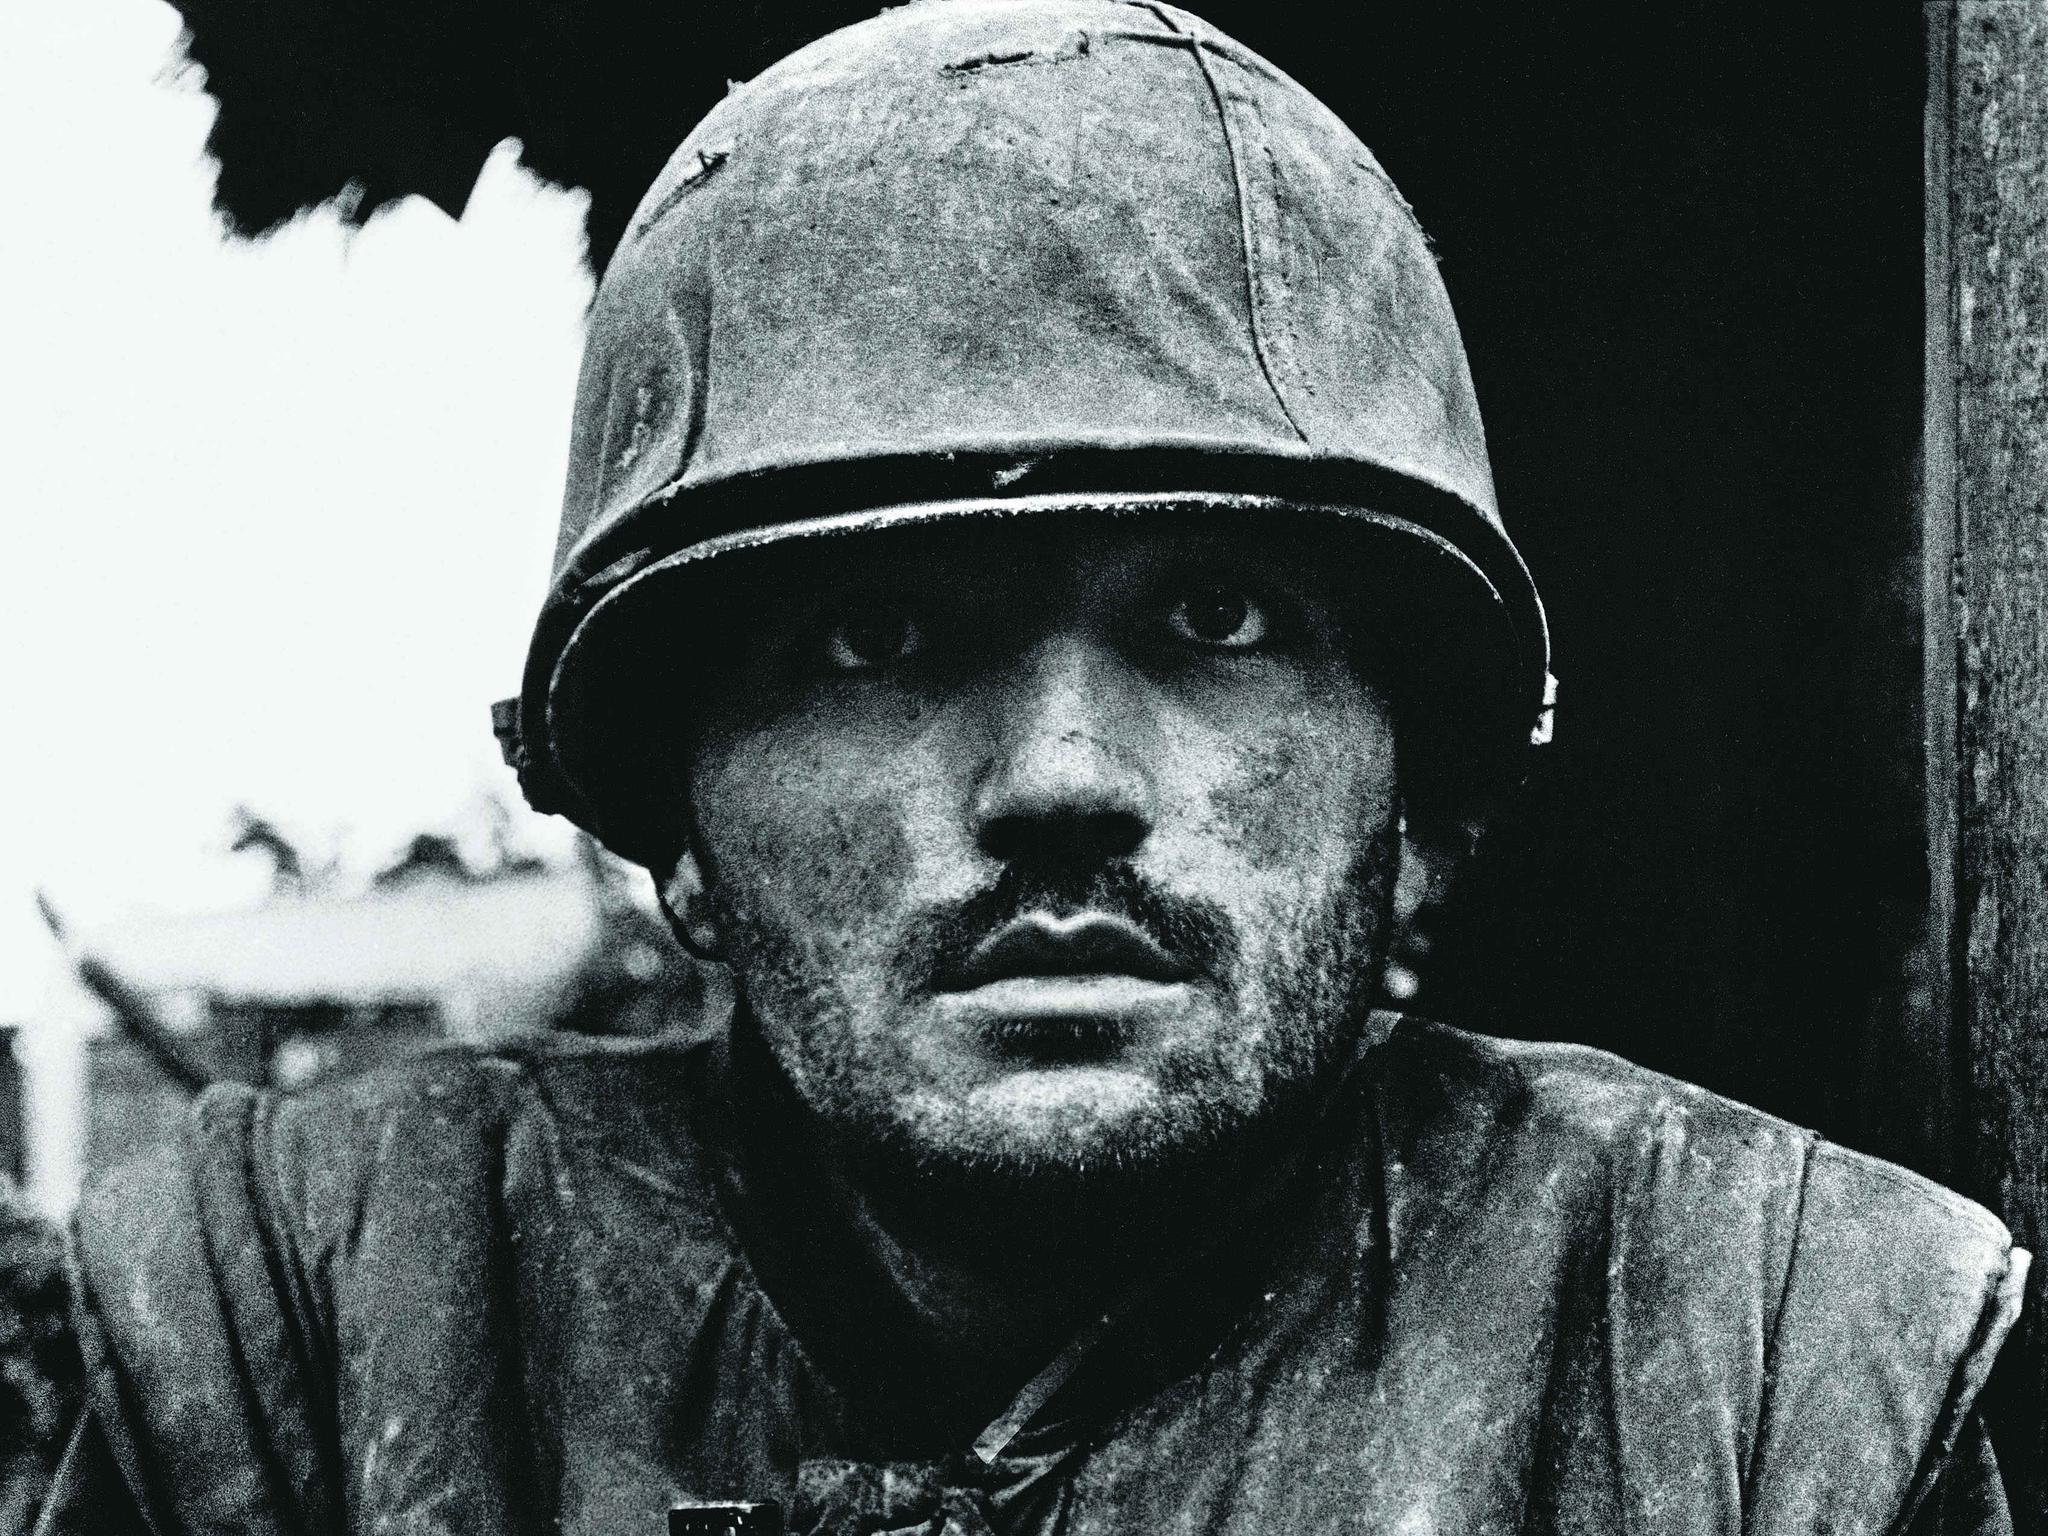 Shell-shocked soldier awaiting transportation away from the front line,  Hue, Vietnam, All Works